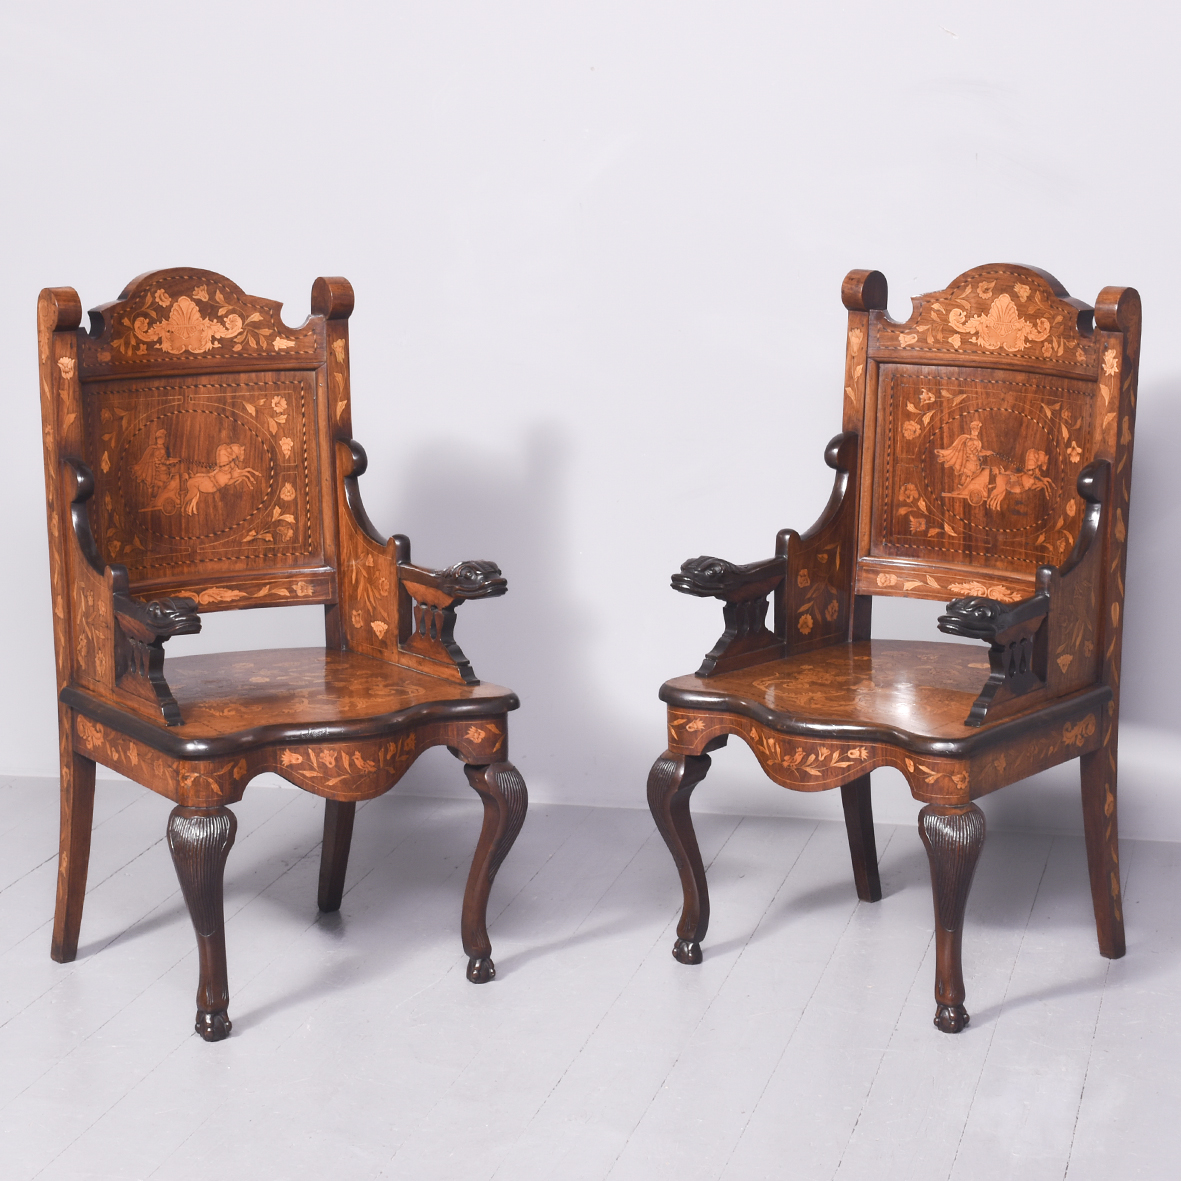 Pair of Dutch Marquetry Armchairs Antique Chairs